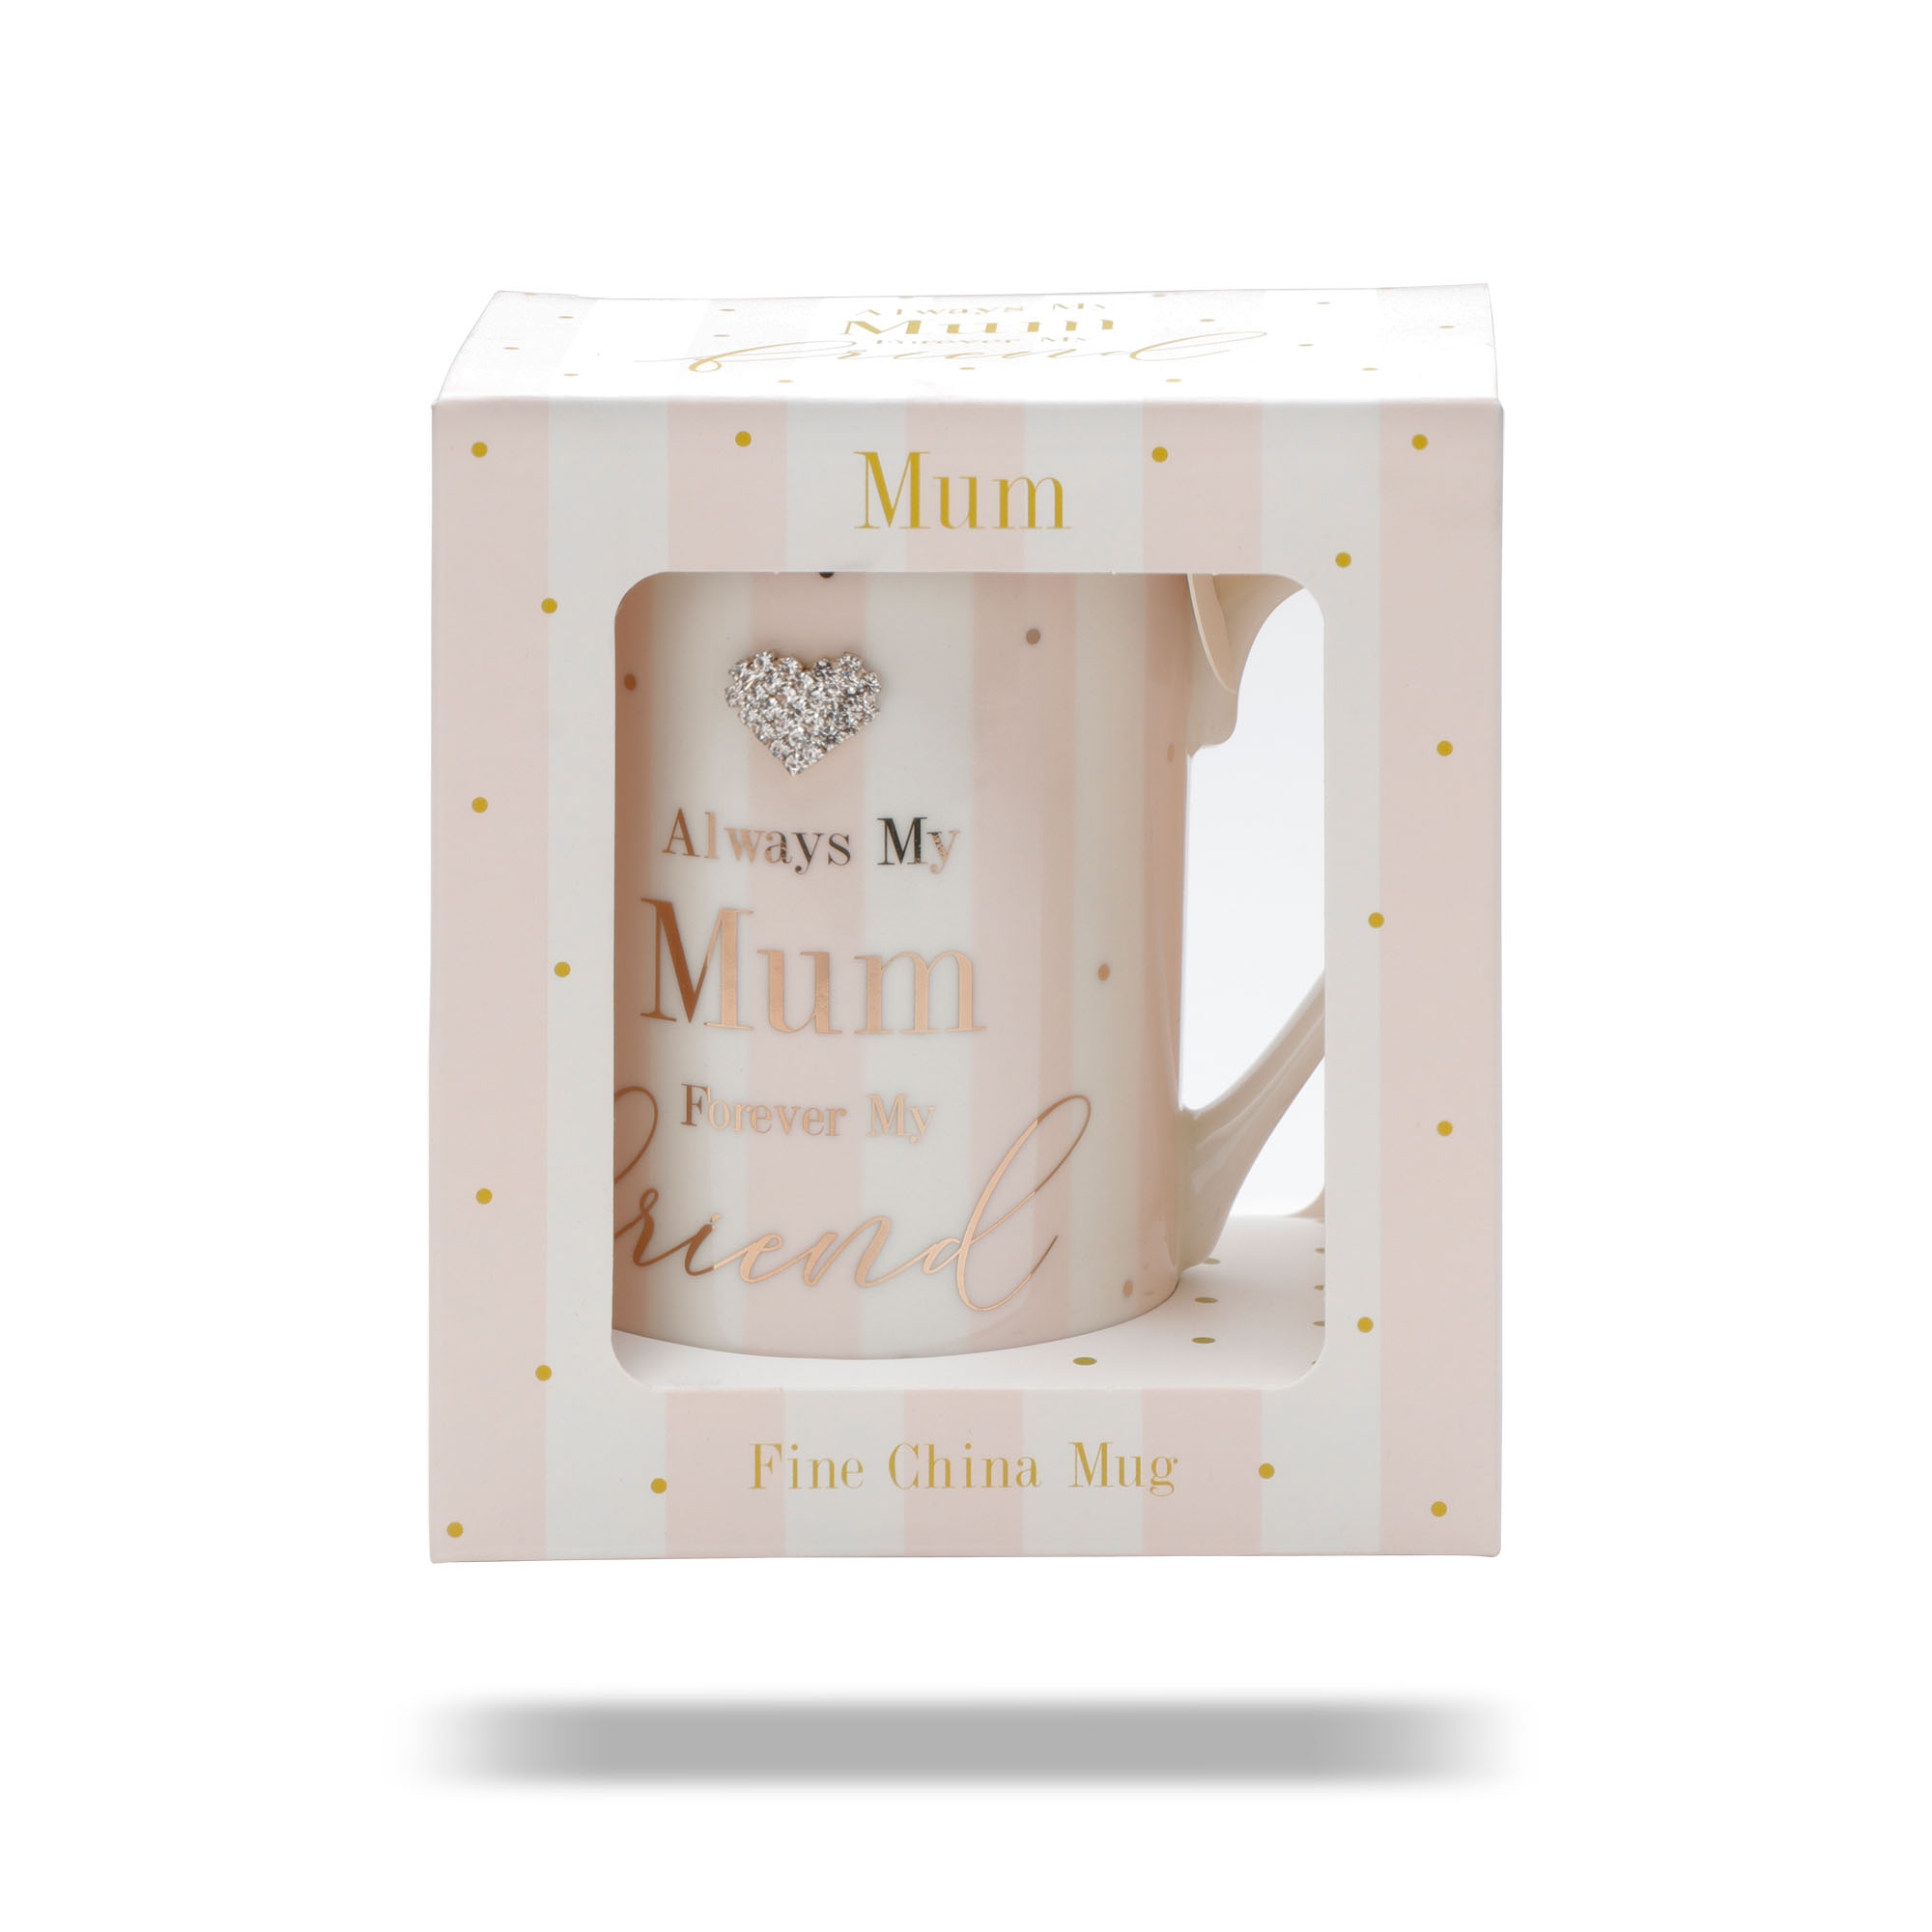 Archies | ARCHIES CERAMIC COFFEE MUG WITH ALWAYS MY MOM FOREVER MY FRIEND PRINTED 1